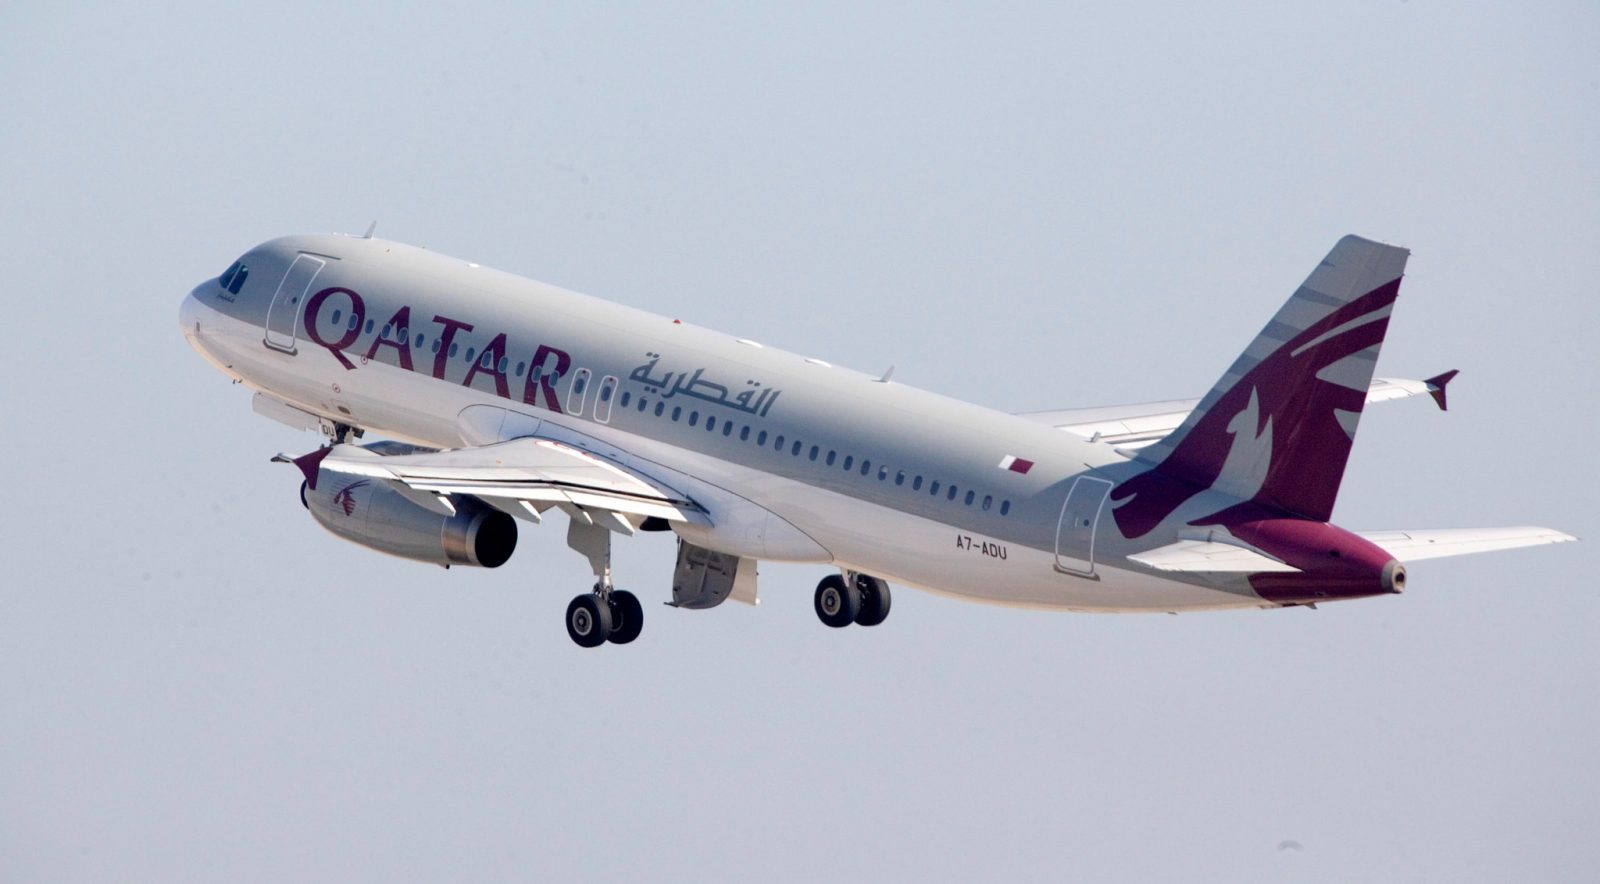 Qatar Airways Continues to Find New Uses for A320 Aircraft Grounded Due to Political Dispute